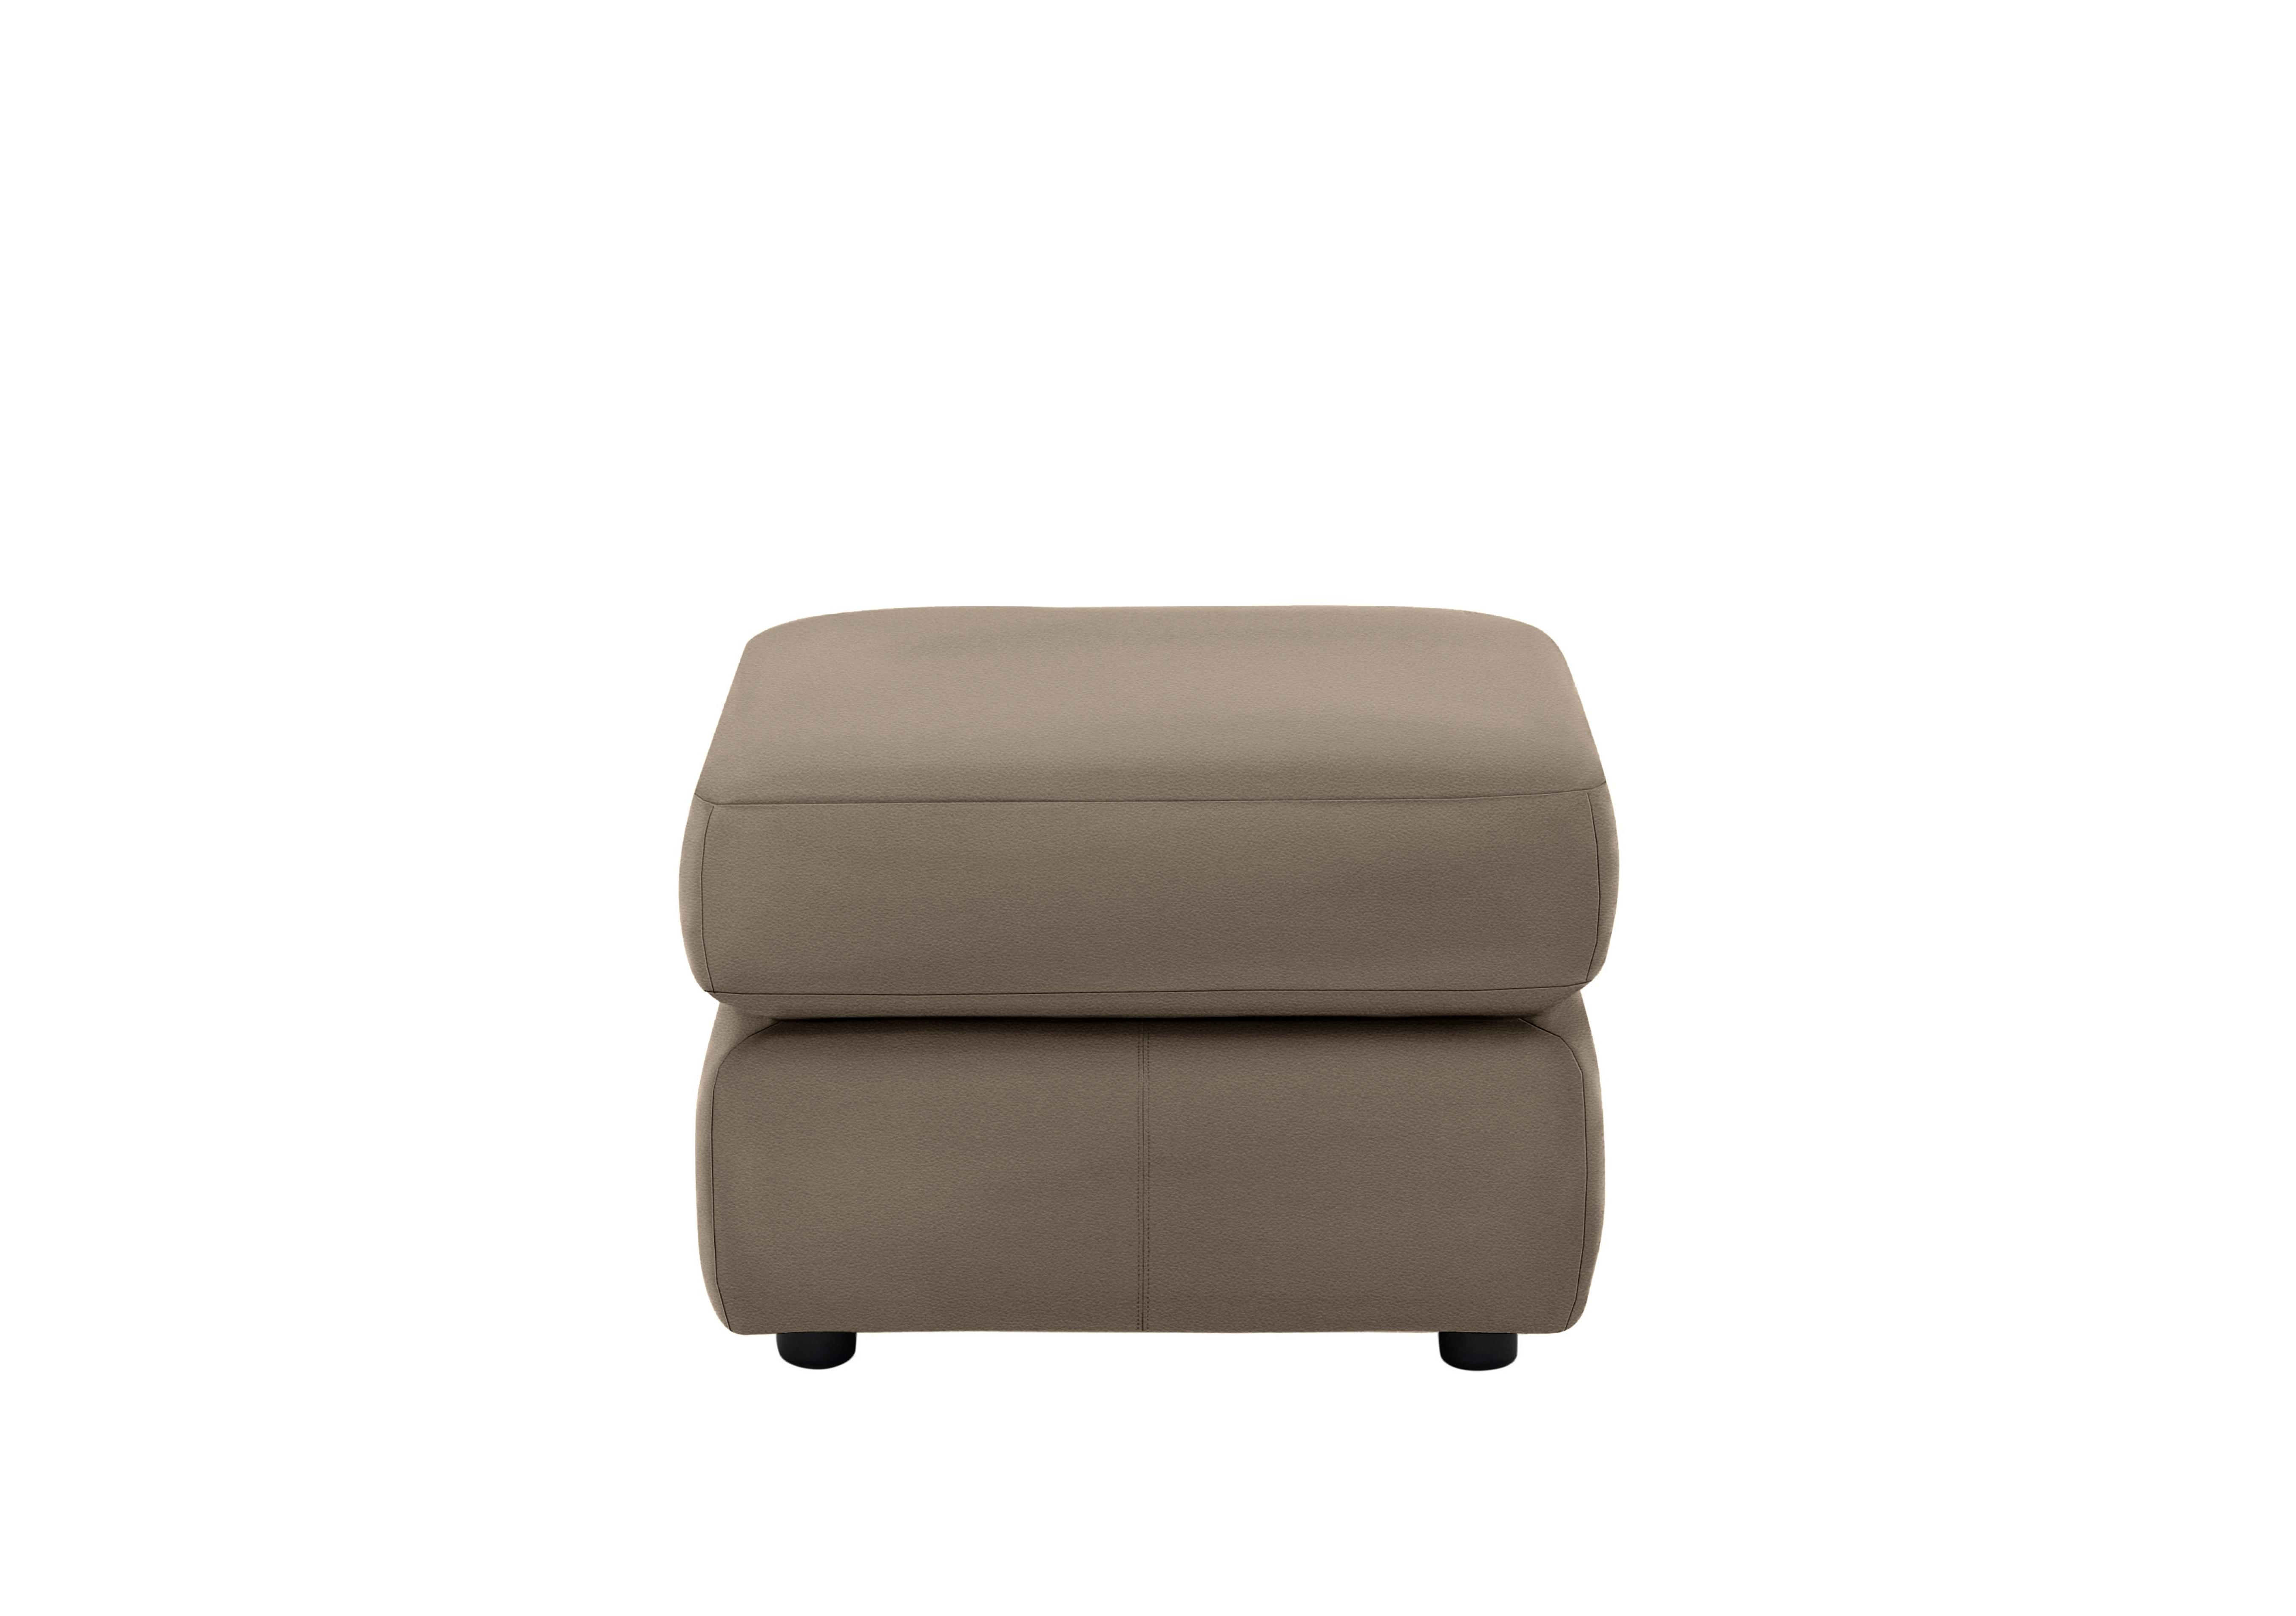 Avon Leather Footstool in L846 Cambridge Taupe on Furniture Village